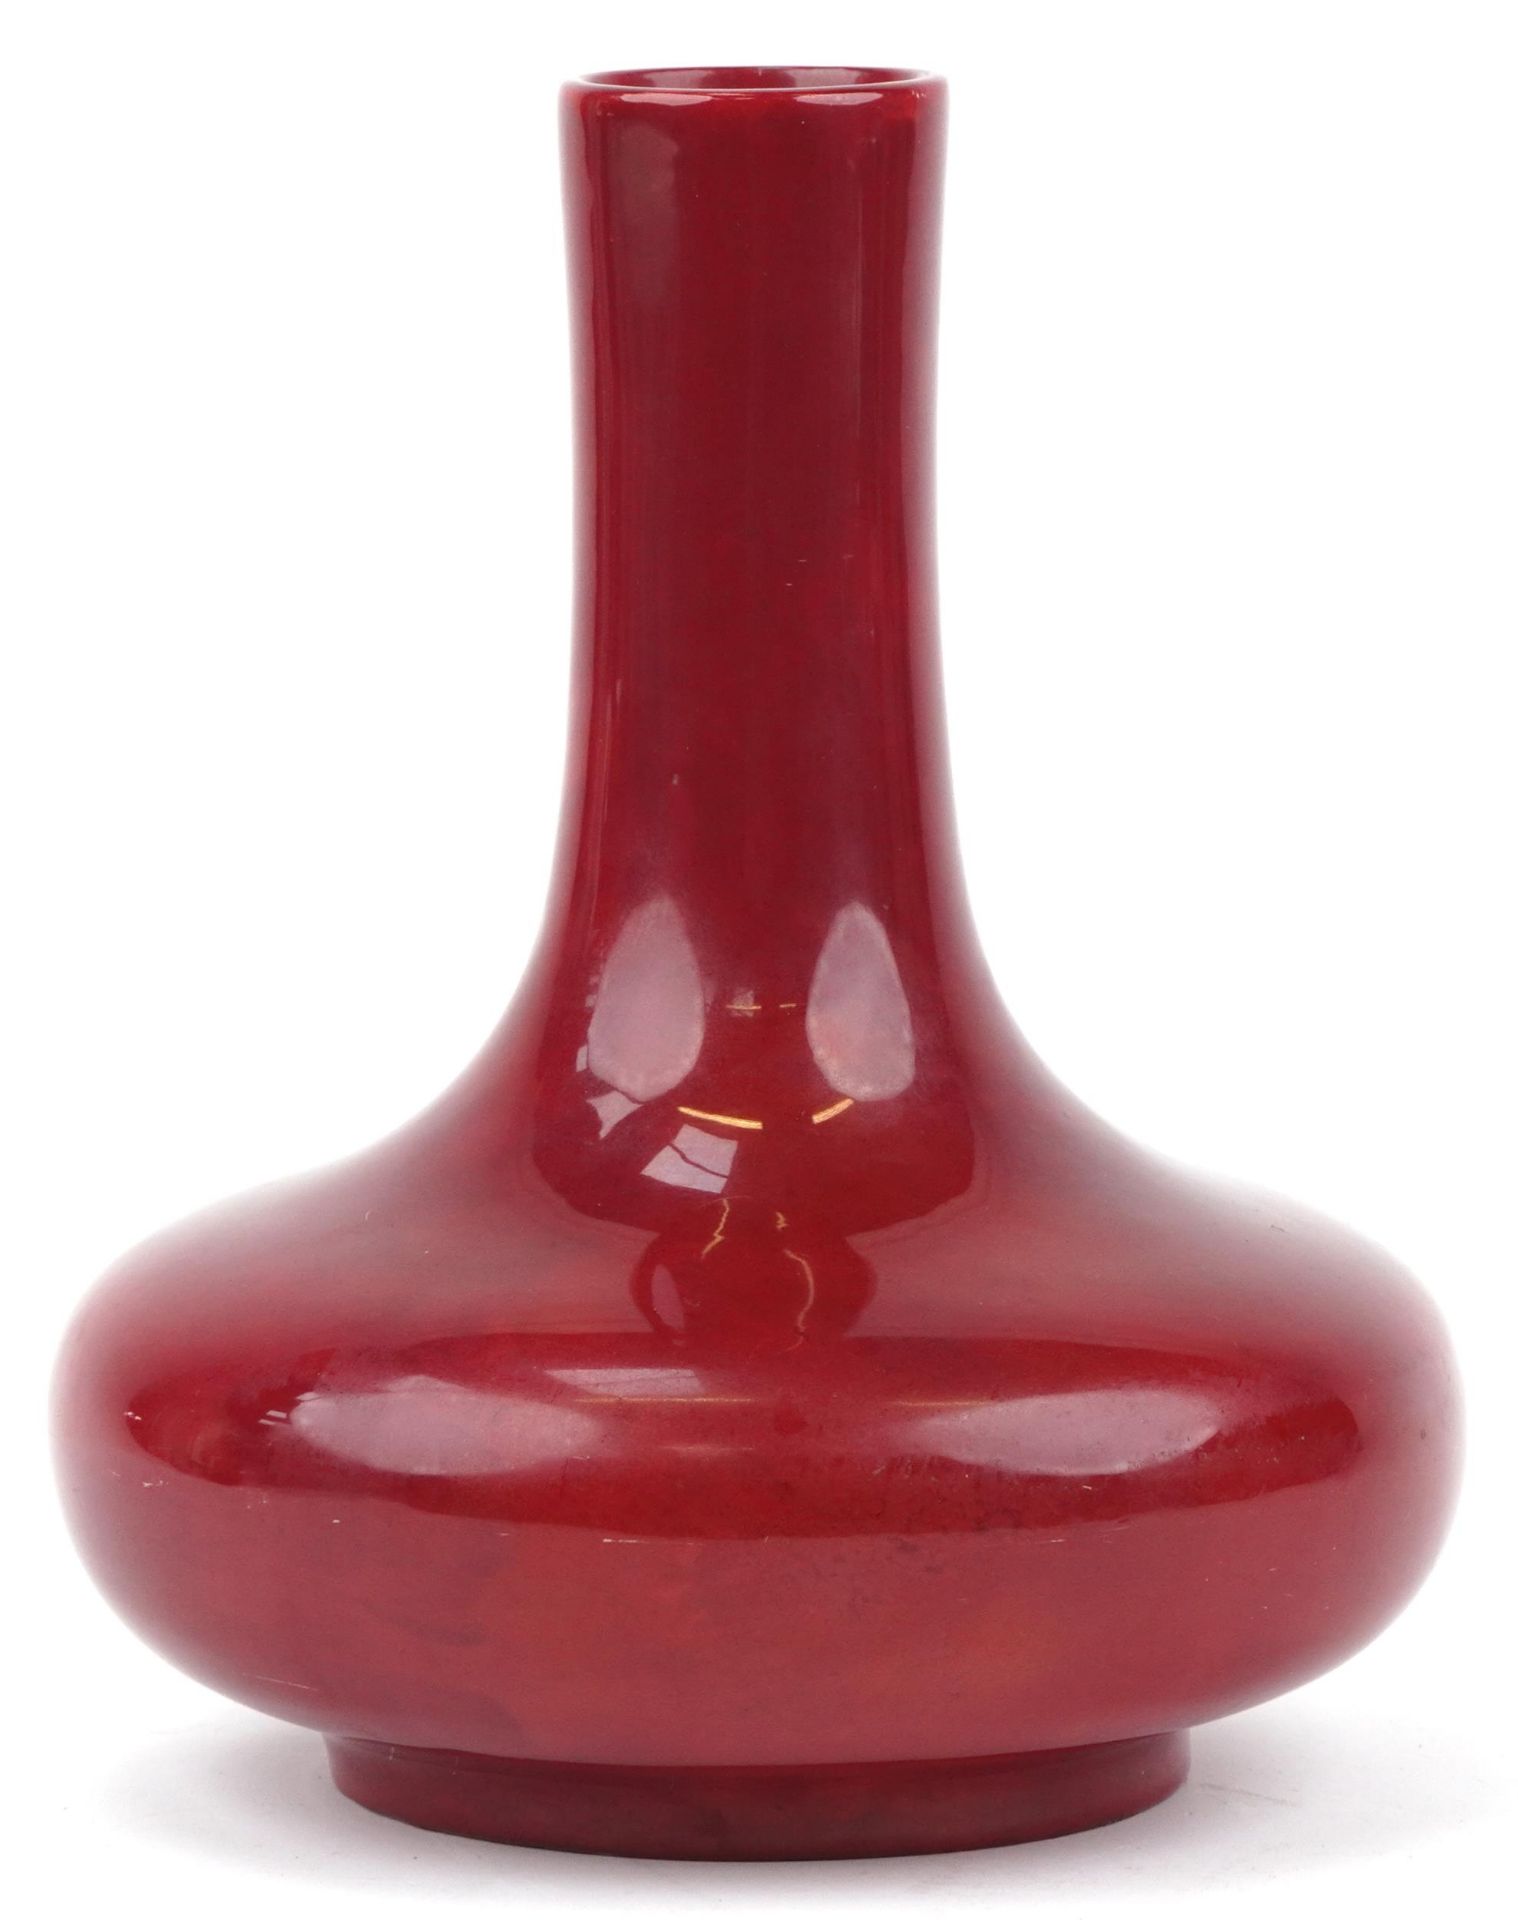 Large Bernard Moore red flambe vase, inscribed Bernard Moore to the base, numbered 1070, 25cm high - Image 2 of 6